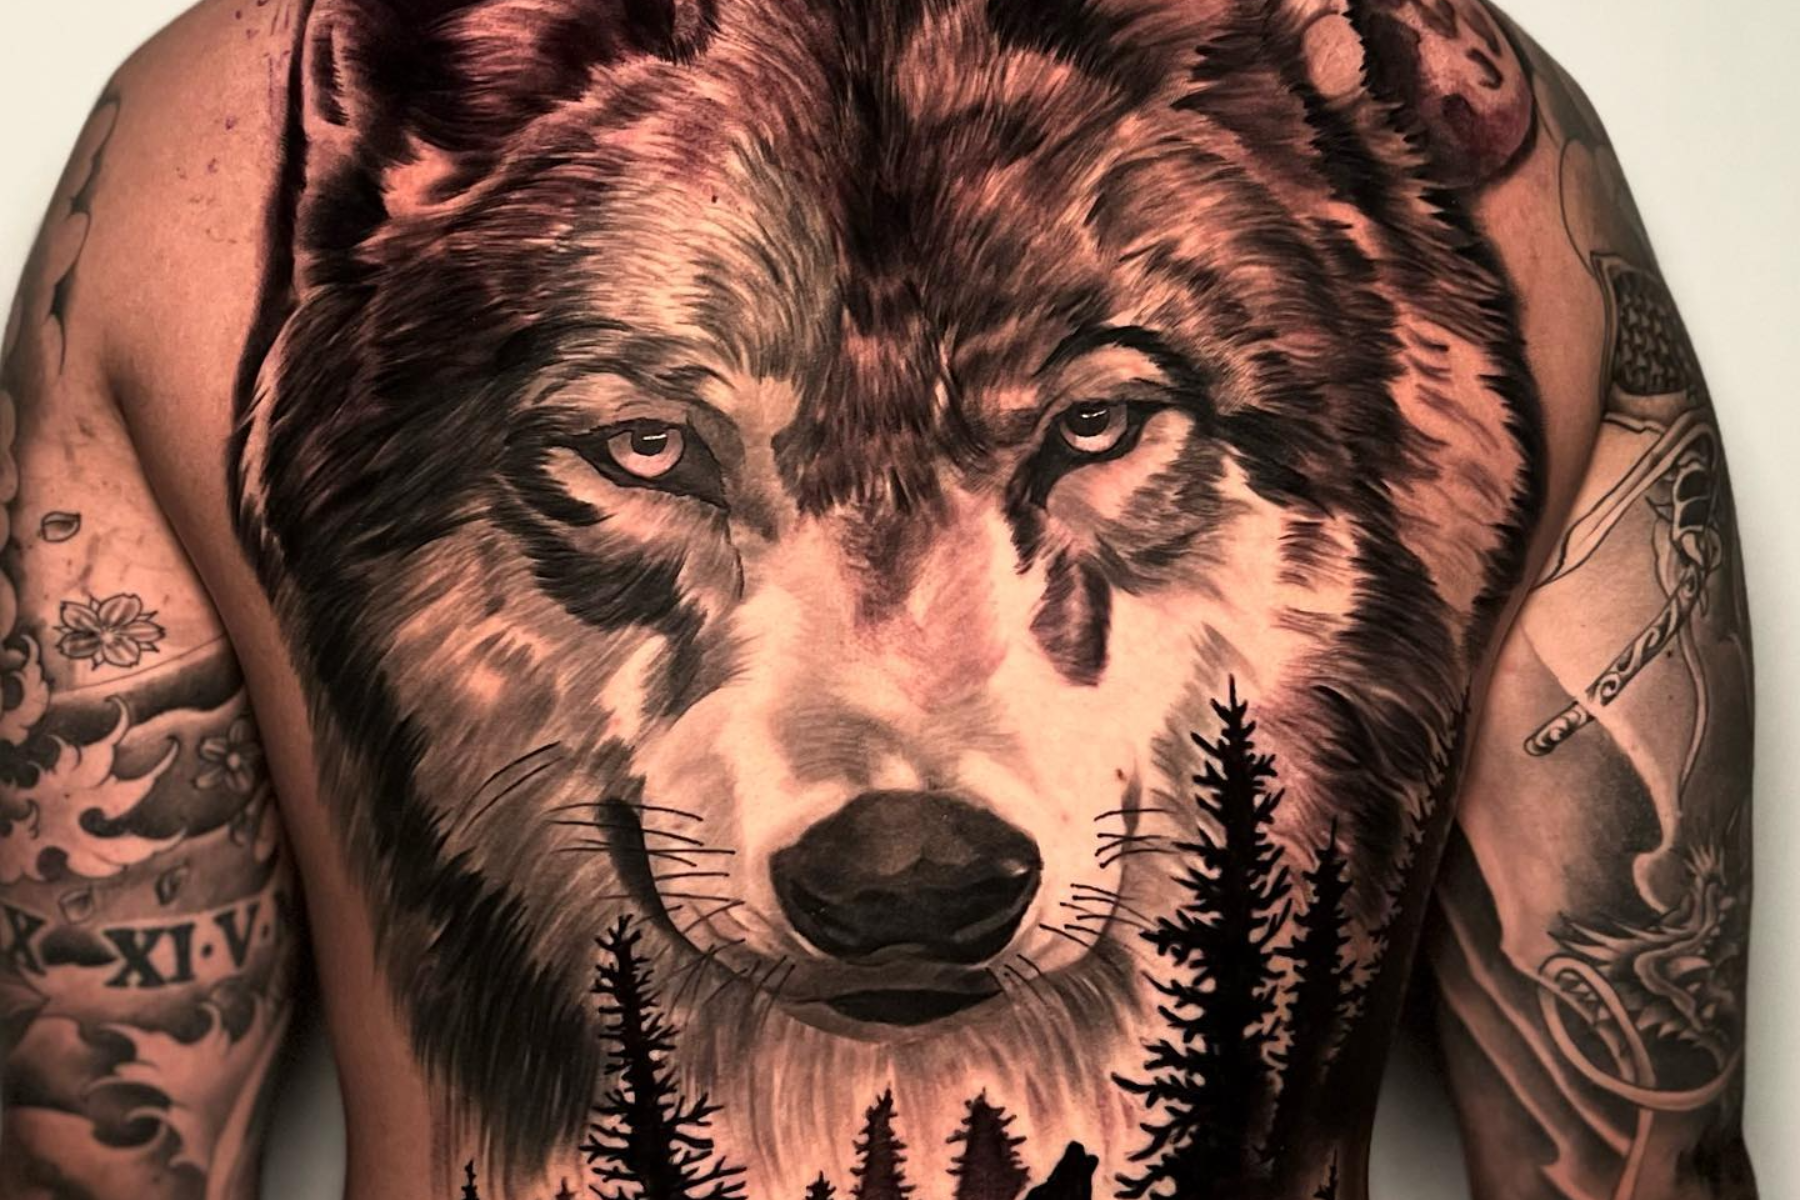 A man is donning a wolf head tattoo on his back